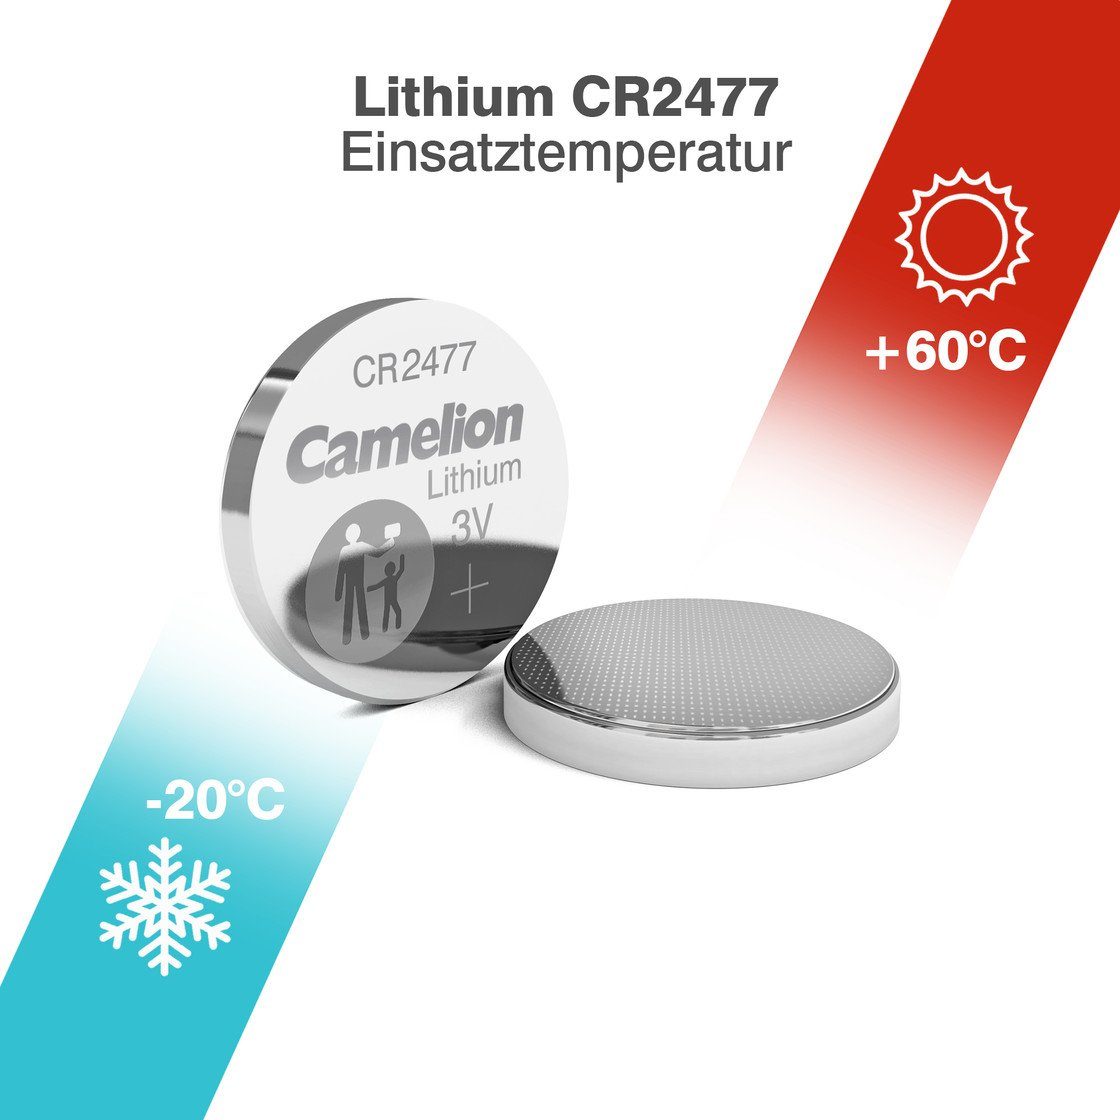 Lithium Alarmanlage CR2477 – Camelion Blister LUPUS ® Knopfzelle gws-powercell V 3 ELECTRONICS